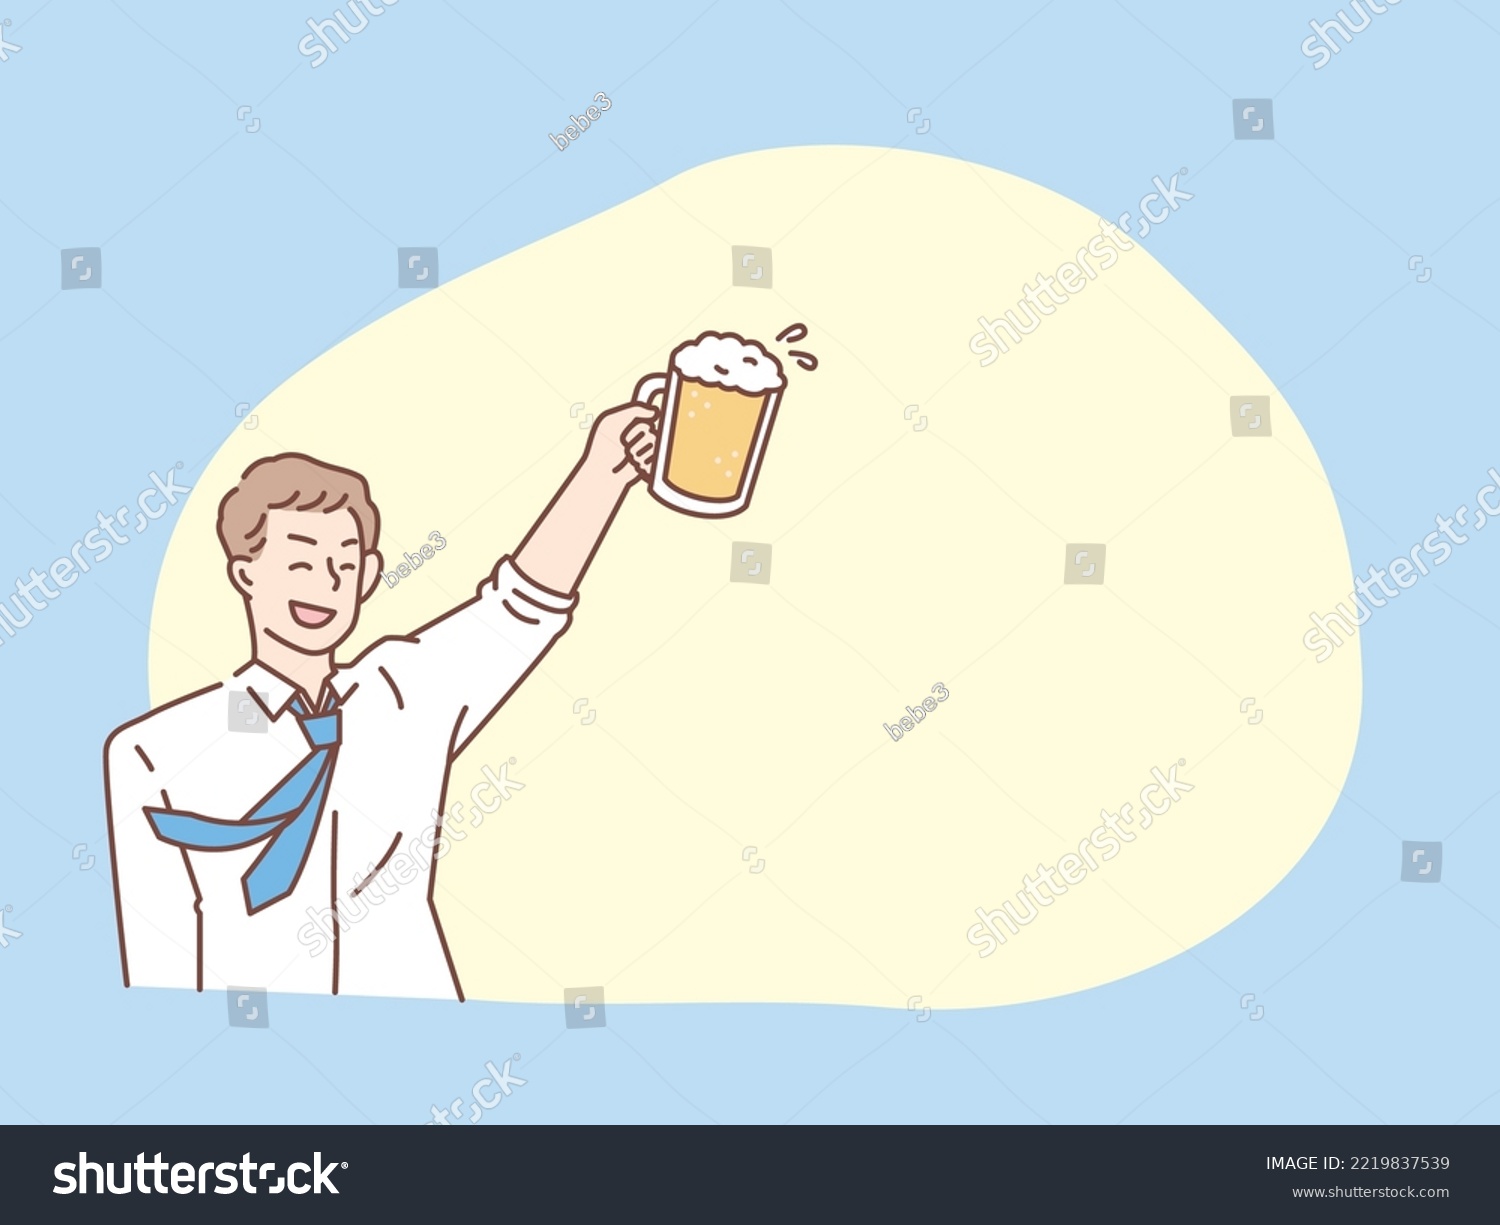 SVG of a cheerful person.Drinking parties, beer, cheerful, toast, launch, year-end parties, events, men. svg